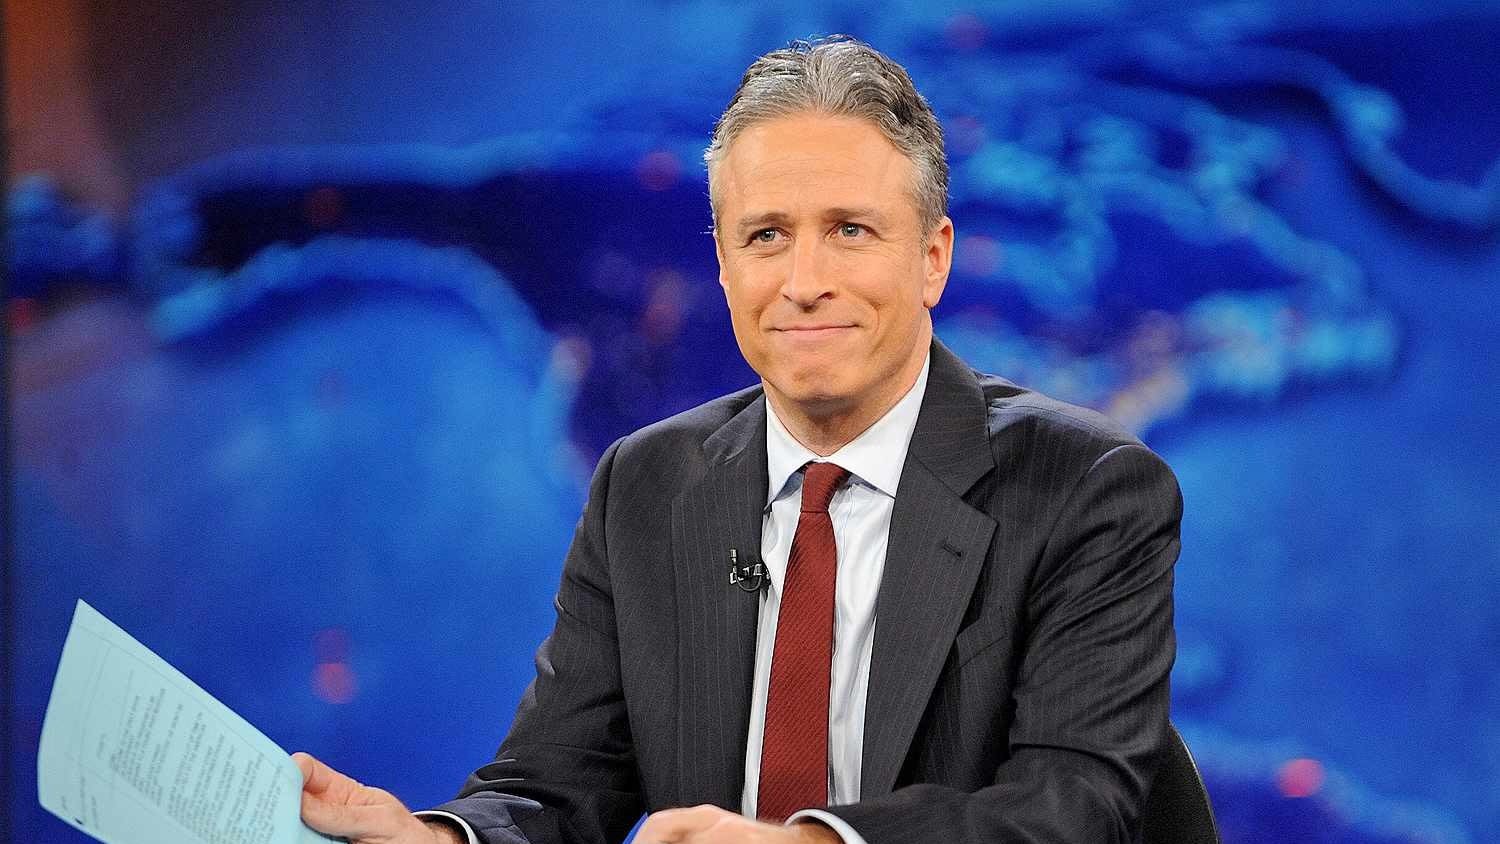 Jon Stewart Launches “The Weekly Show” Podcast